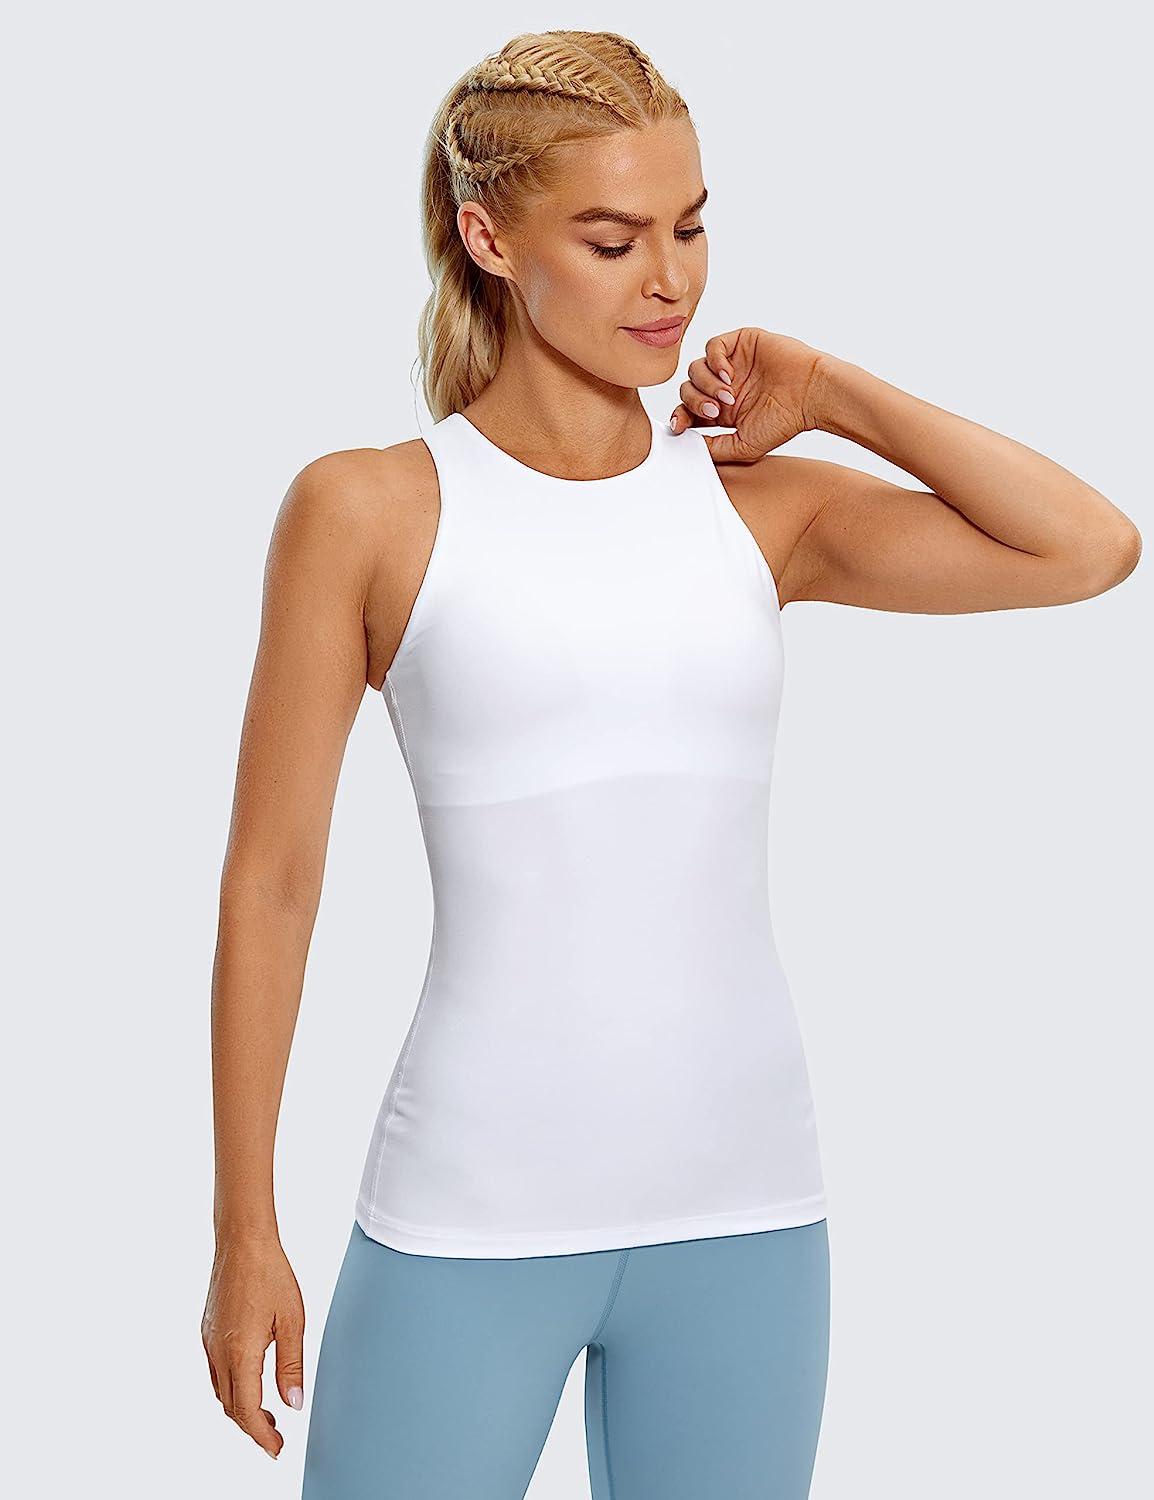 CRZ YOGA Riding Athletic Tank Tops for Women